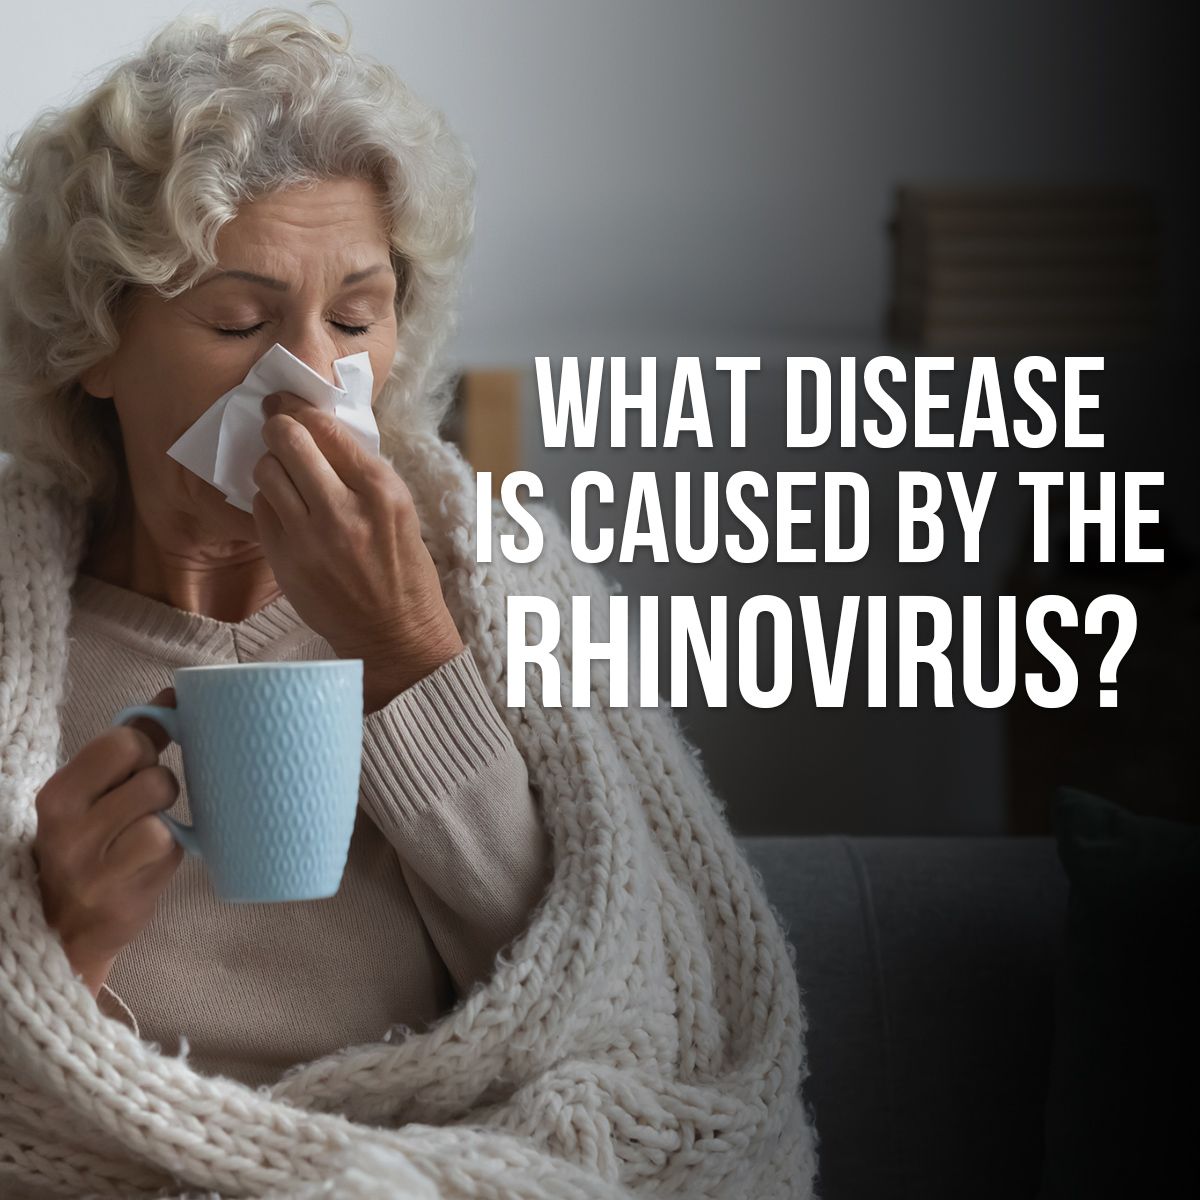 What Disease Is Caused by the Rhinovirus?